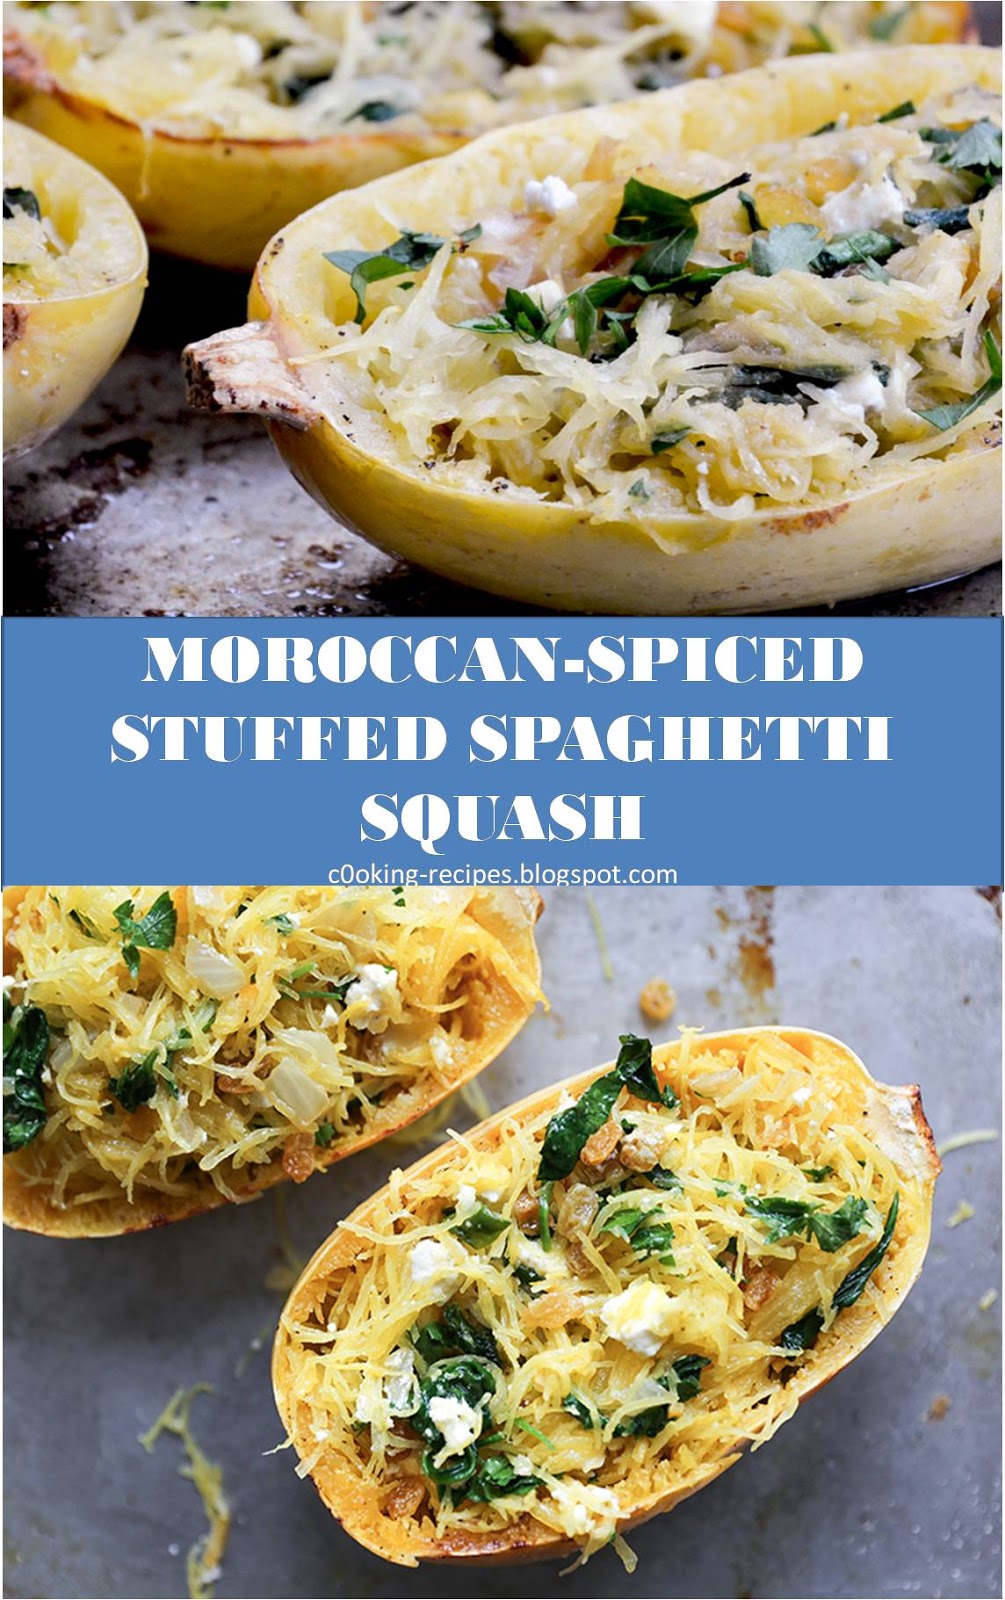 29 Reviews: My BEST #Recipes >> MOROCCAN-SPICED STUFFED SPAGHETTI ...